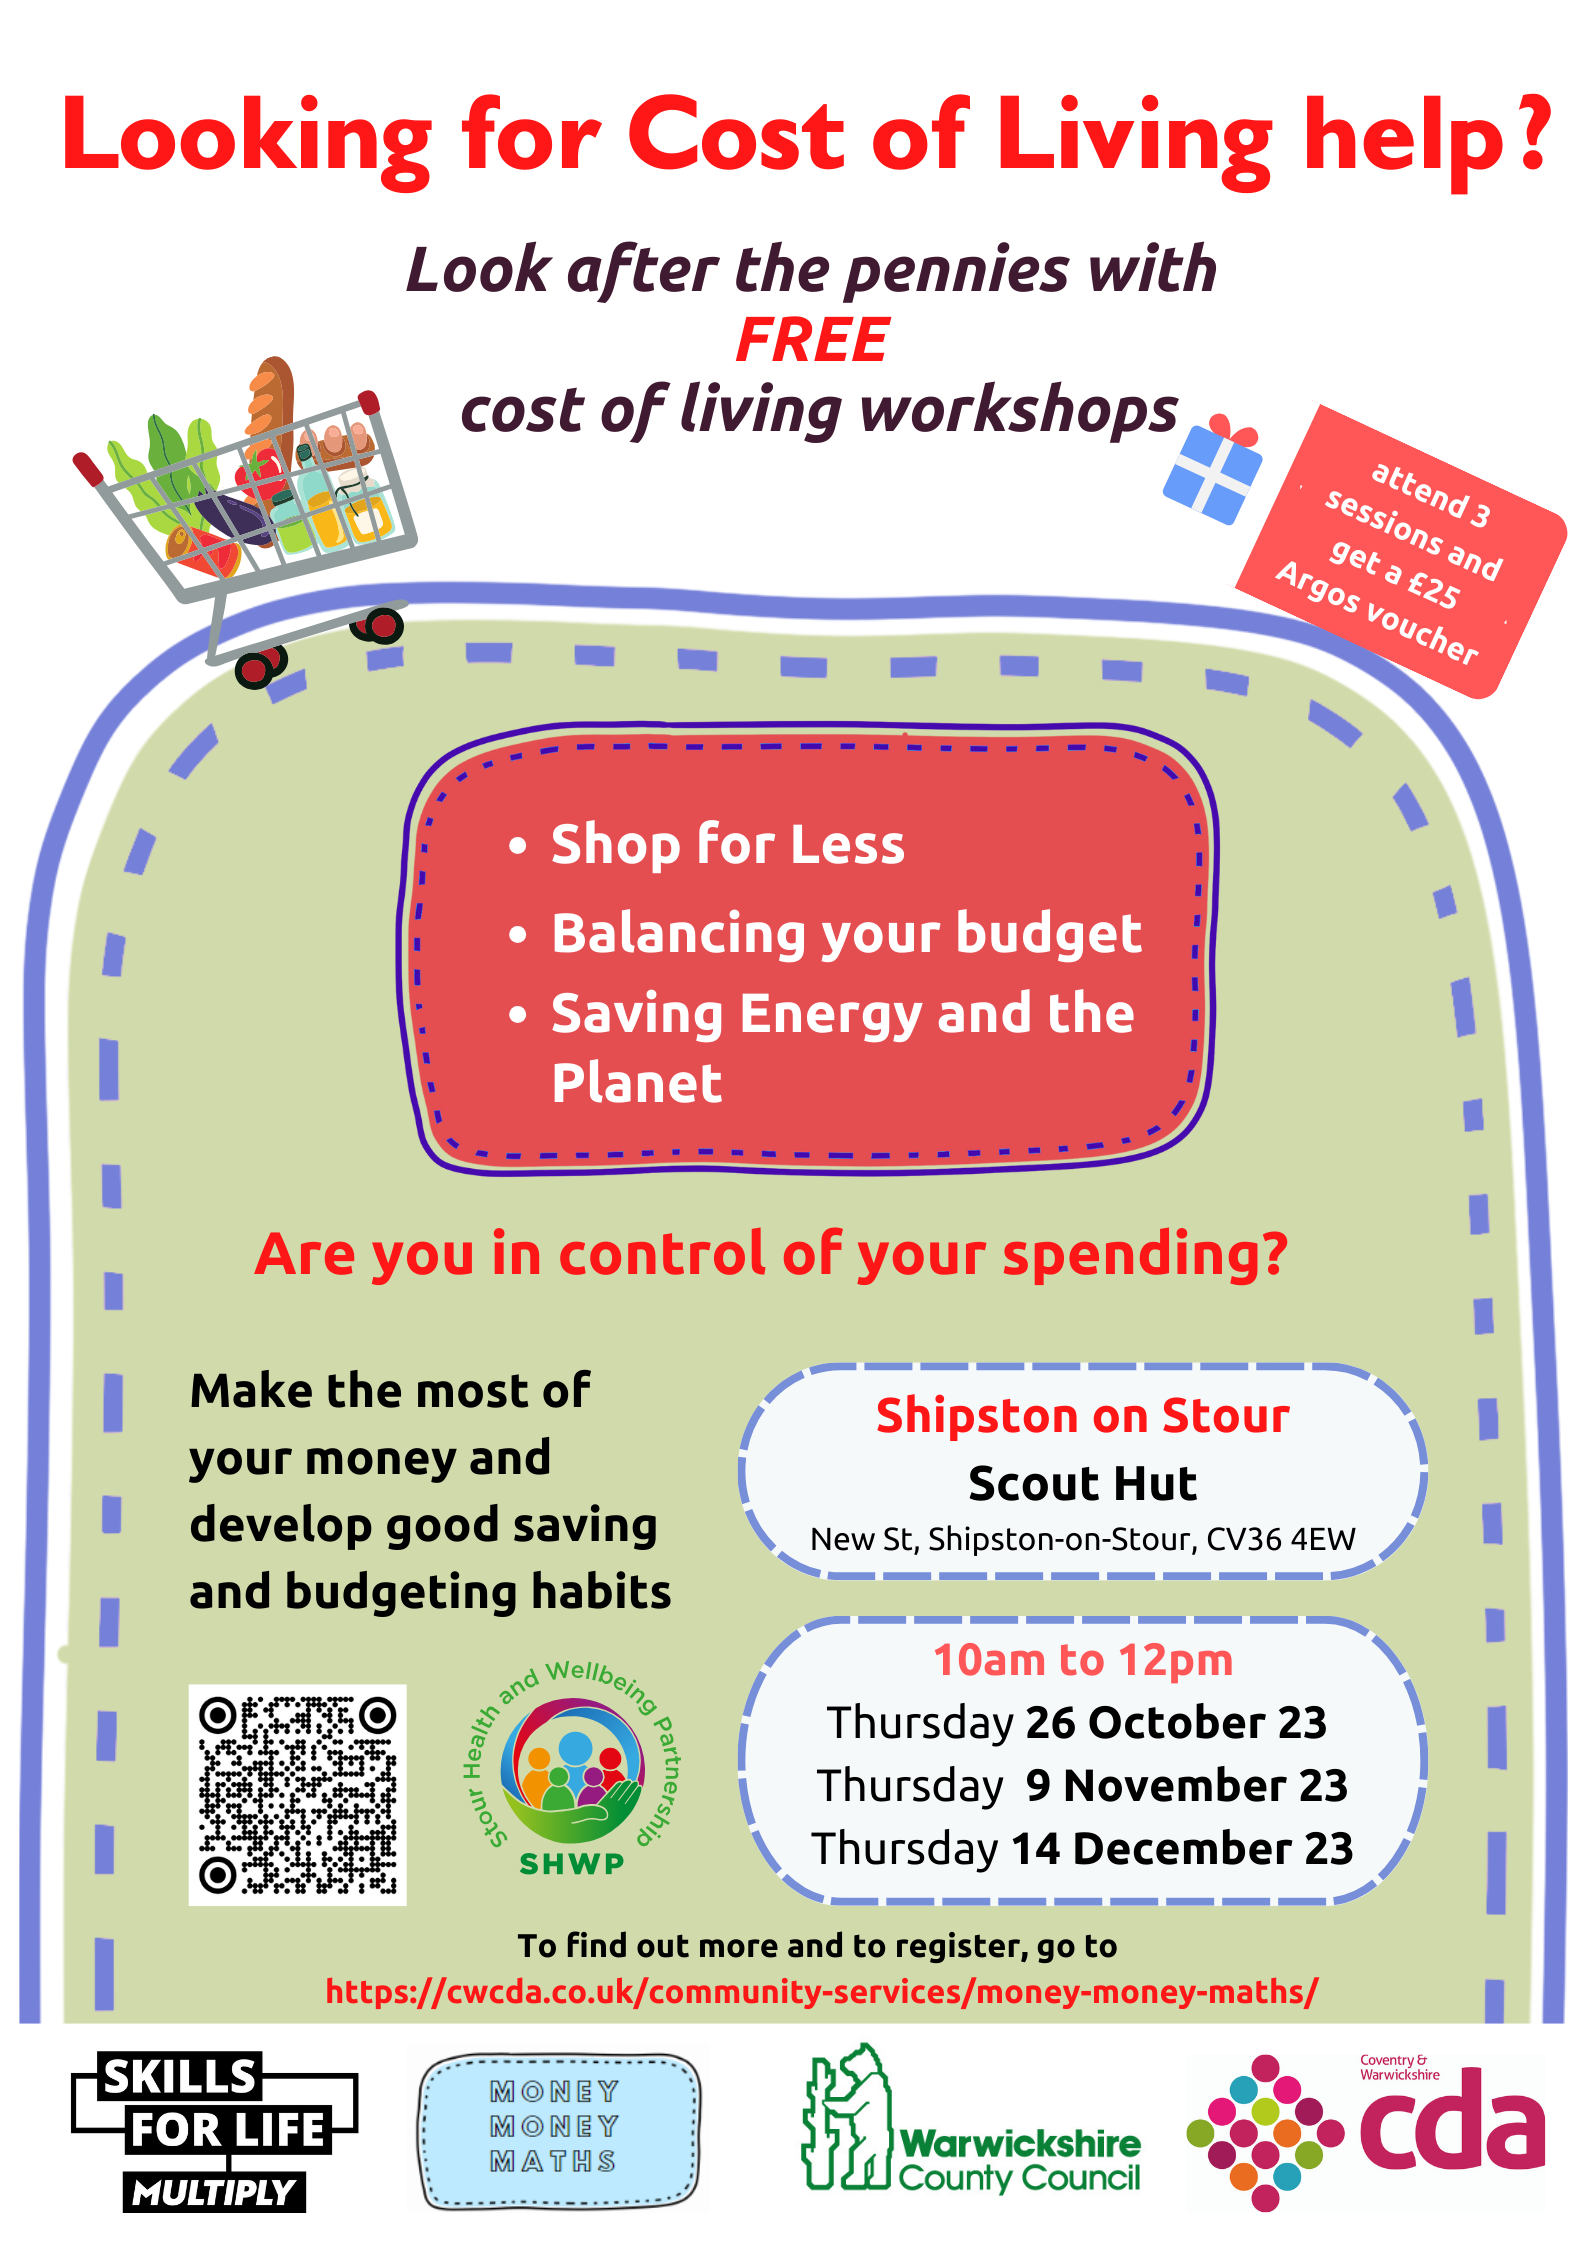 Look after the pennies with FREE cost of living workshops - attend 3 sessions and get a £25 Argos voucher